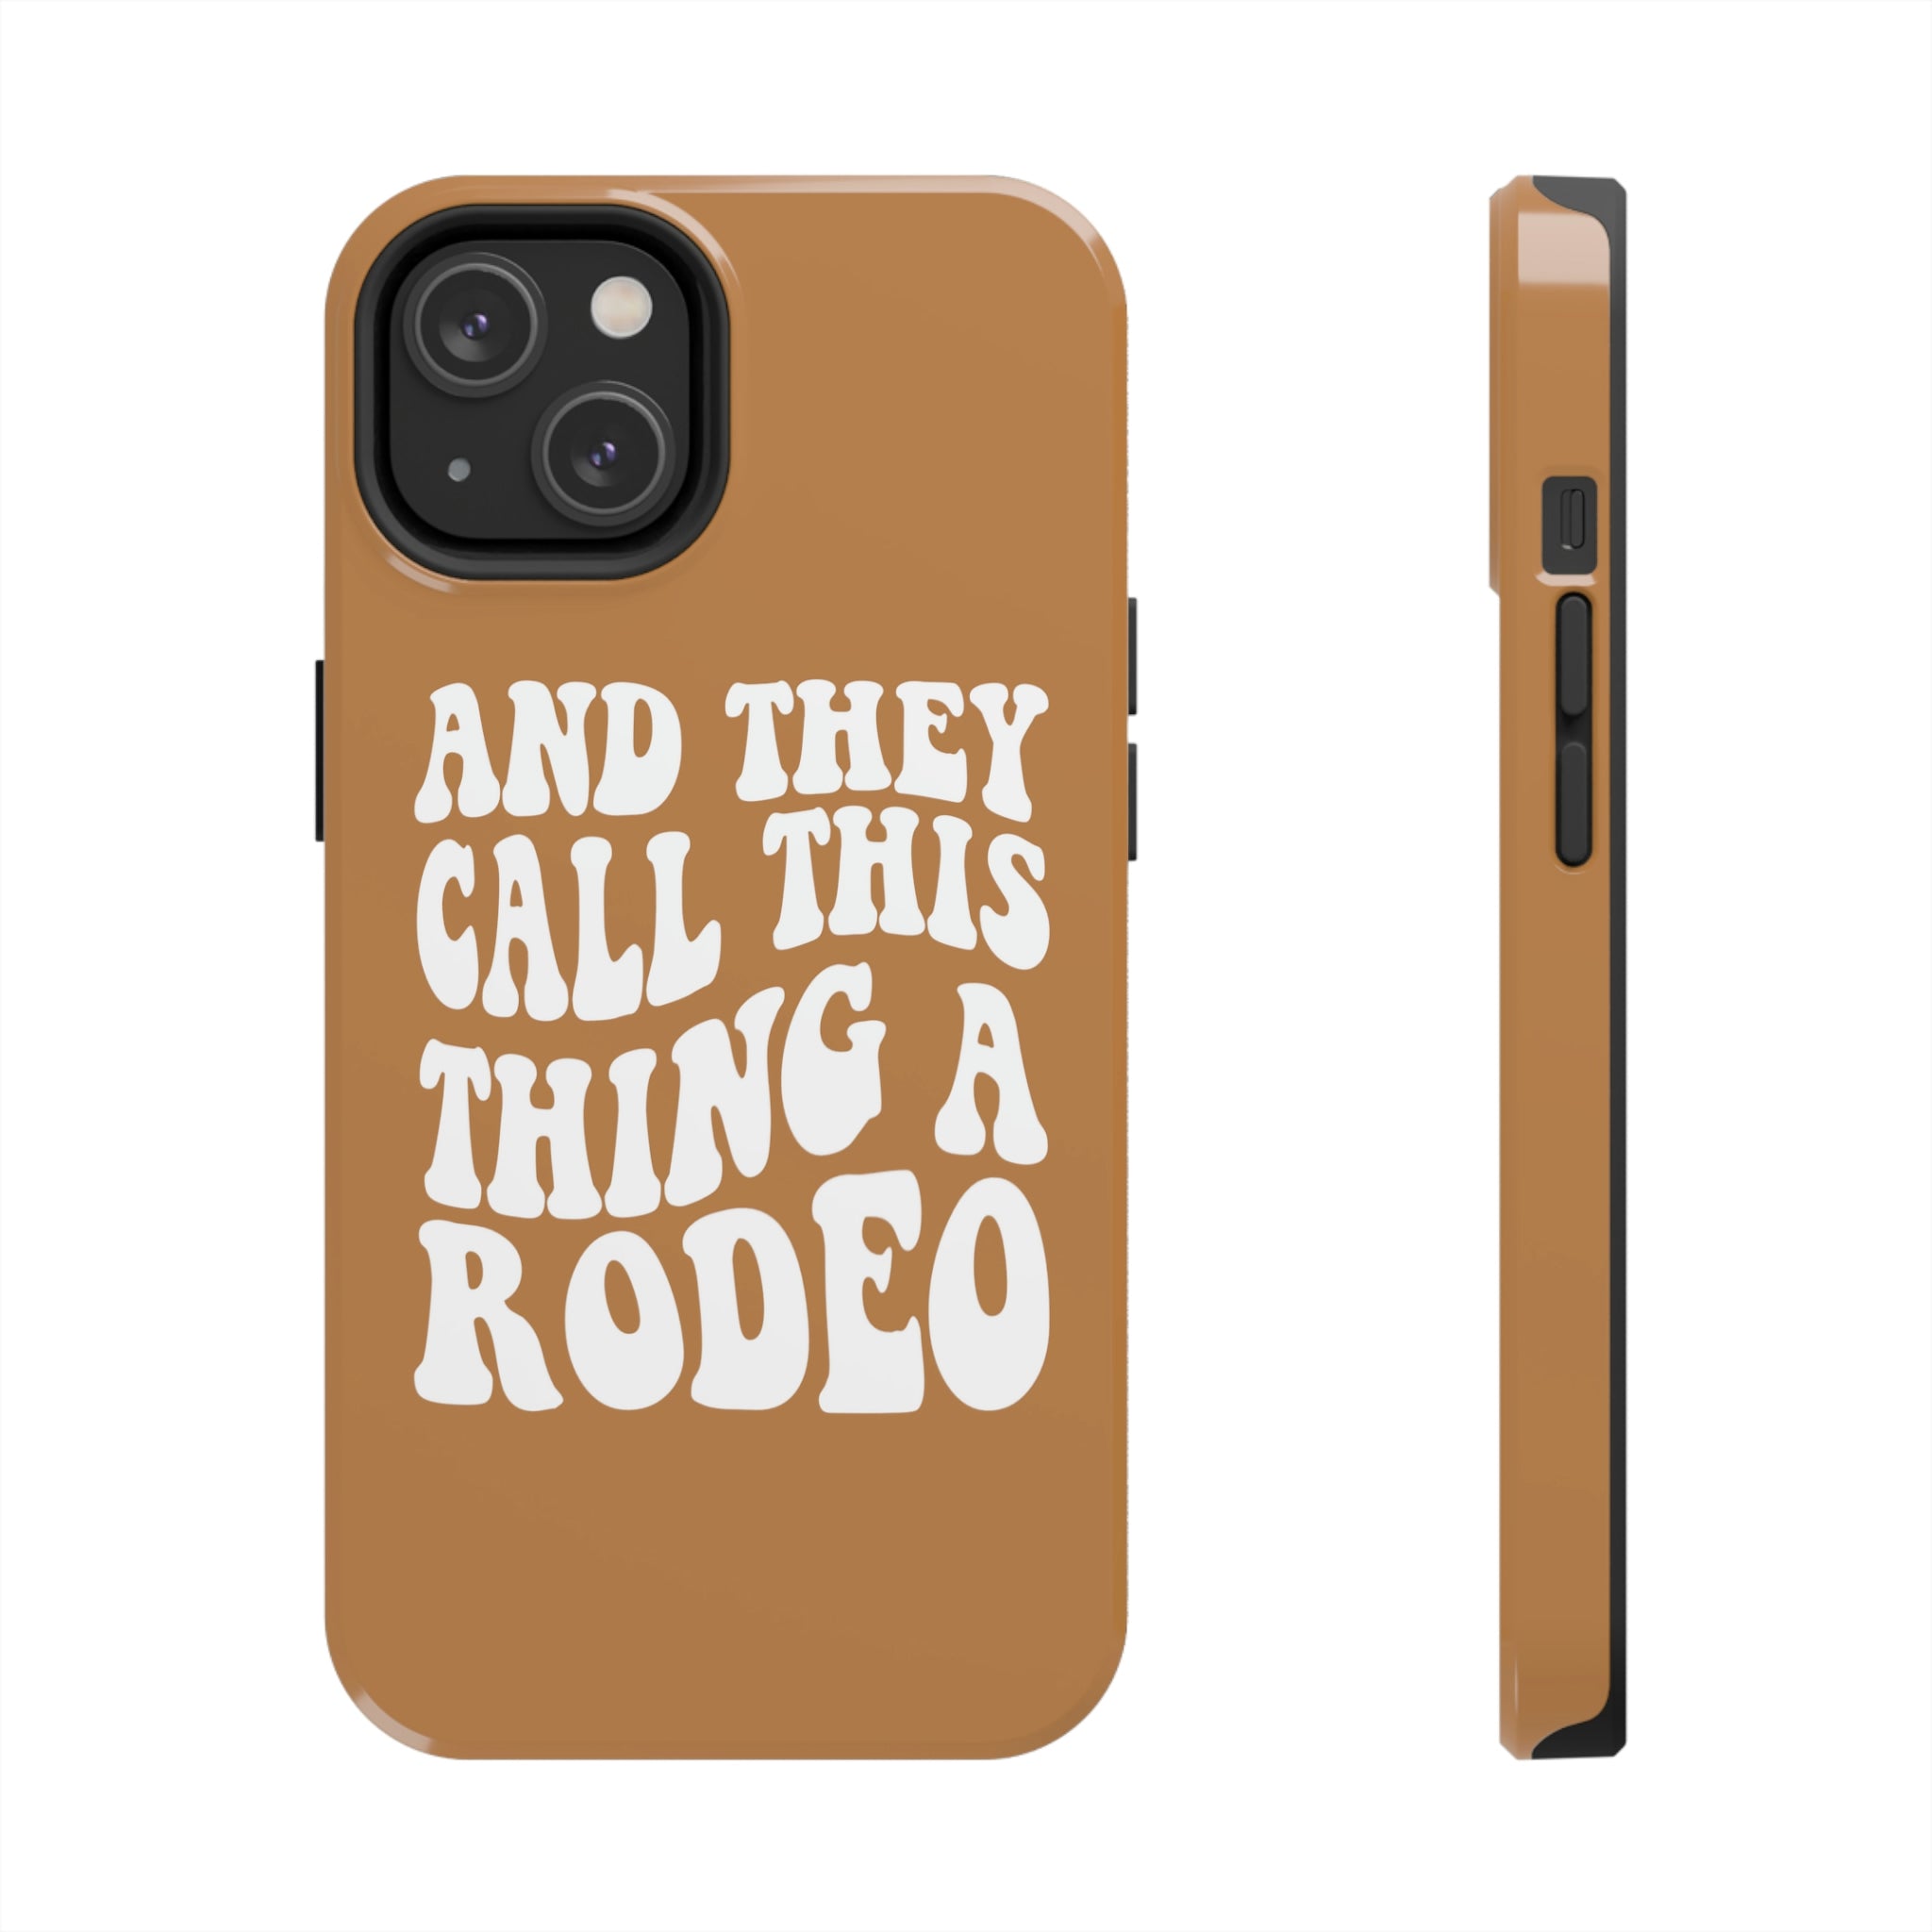 Rodeo Phone Cases